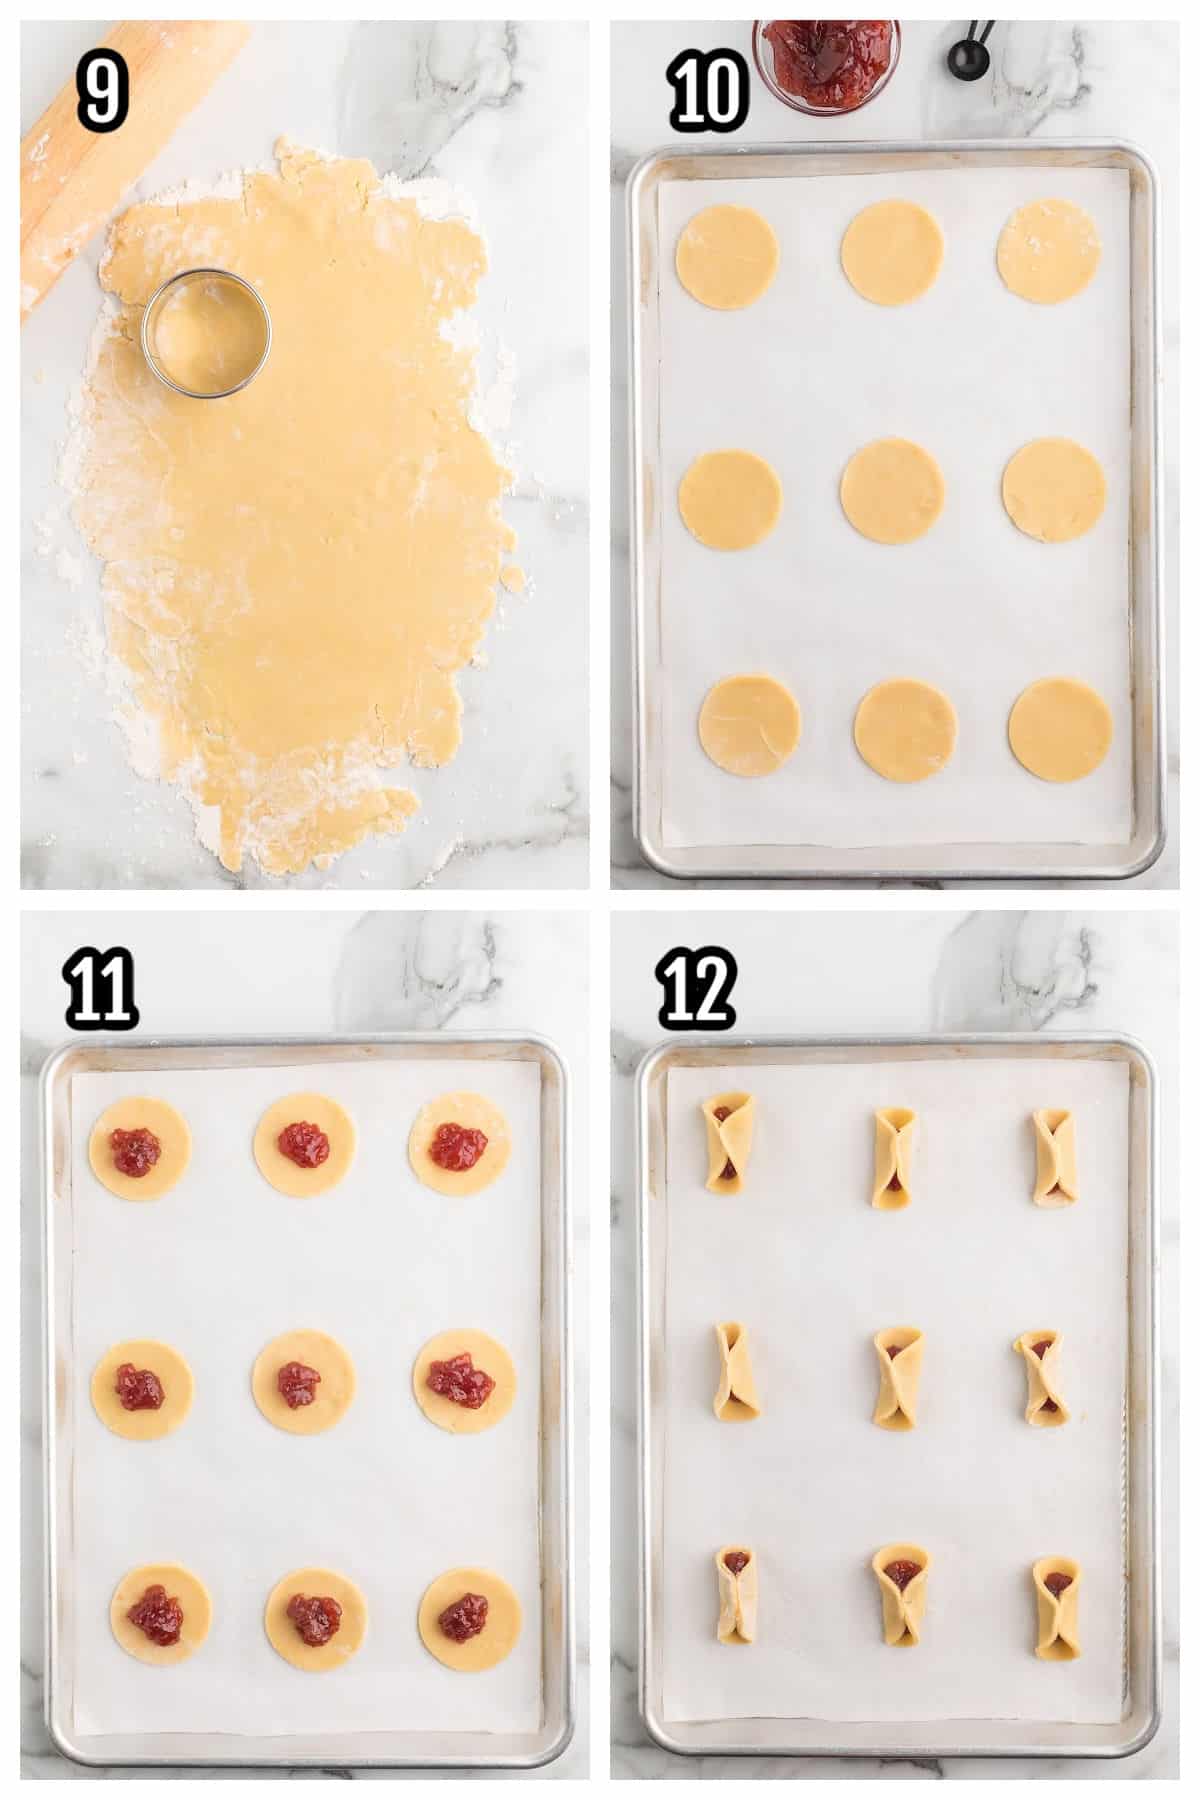 The third collage features steps 9 to 12 of forming the Italian Christmas Cookies named Pizzicati. 